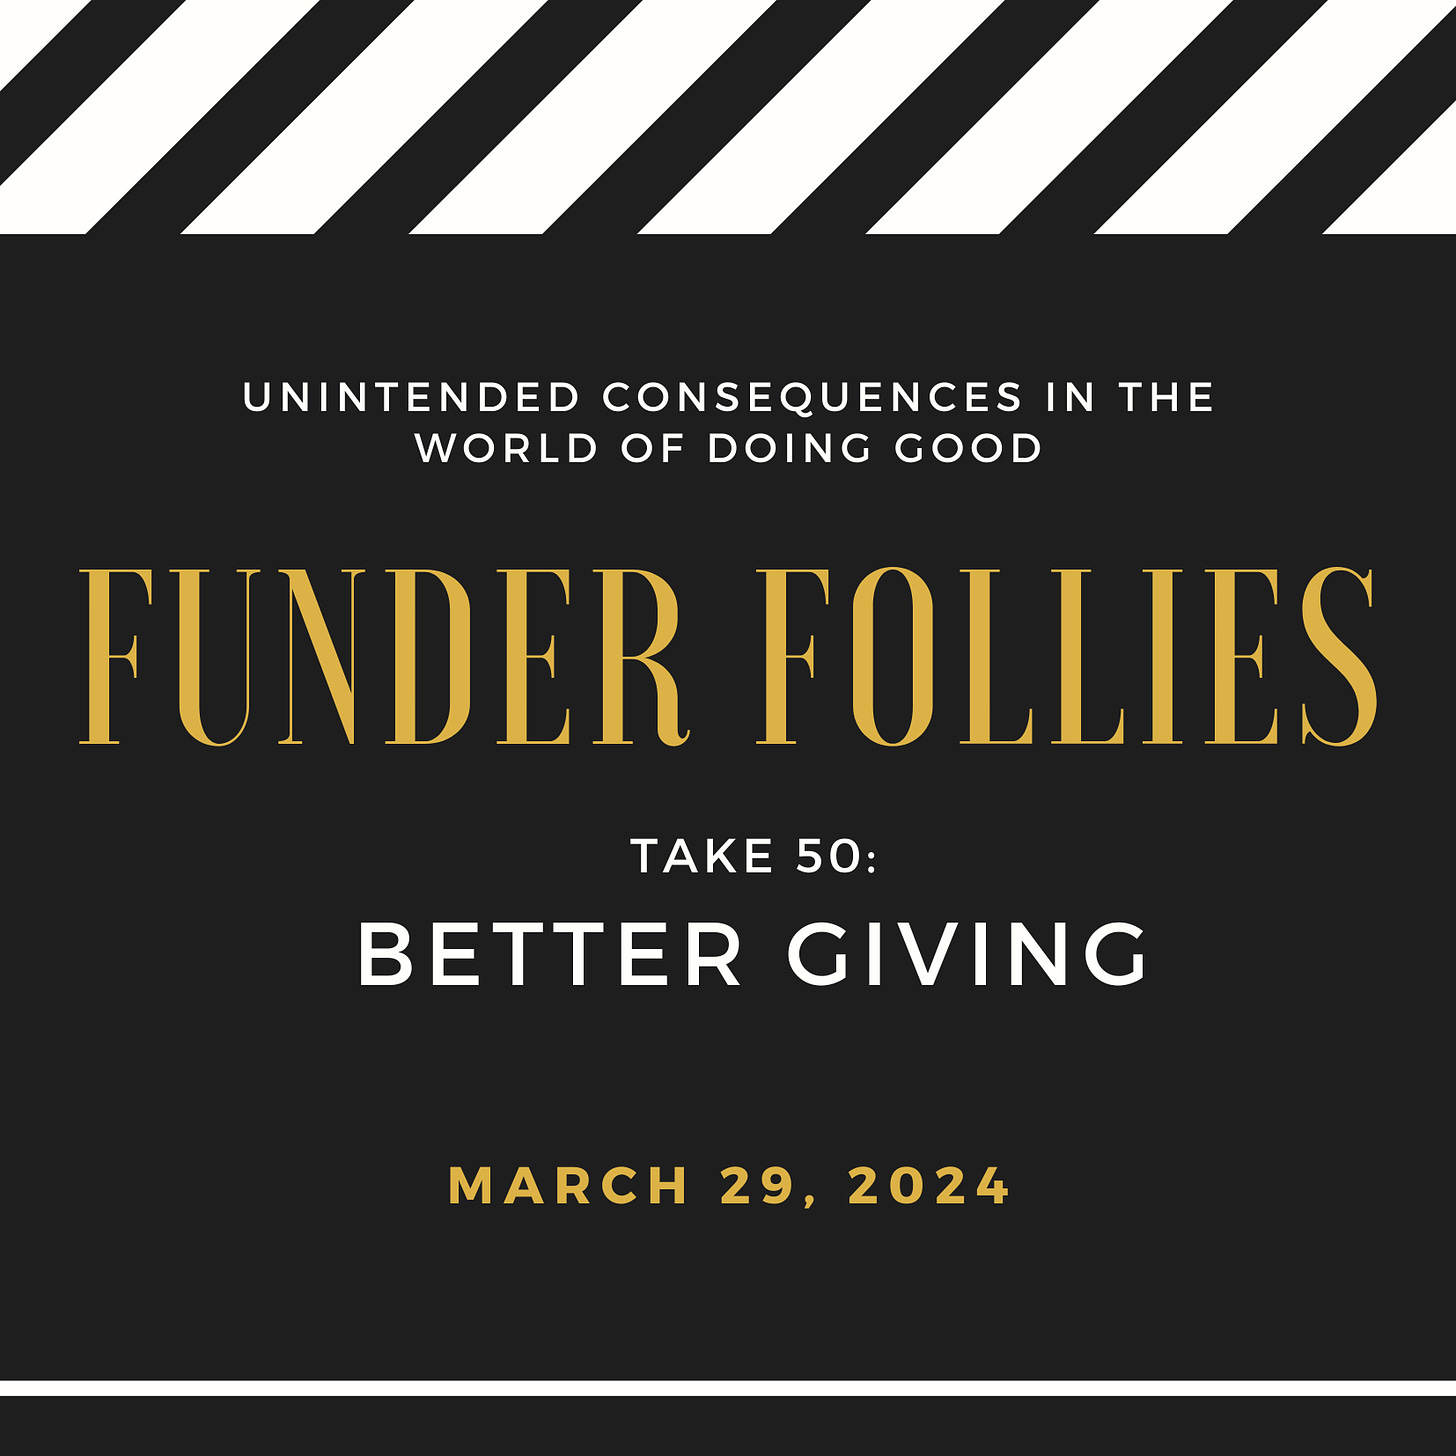 black and white film clapper board showing Funder Follies, Unintended Consequences of Doing Good, Take # 50, Better Giving, March 29, 2024